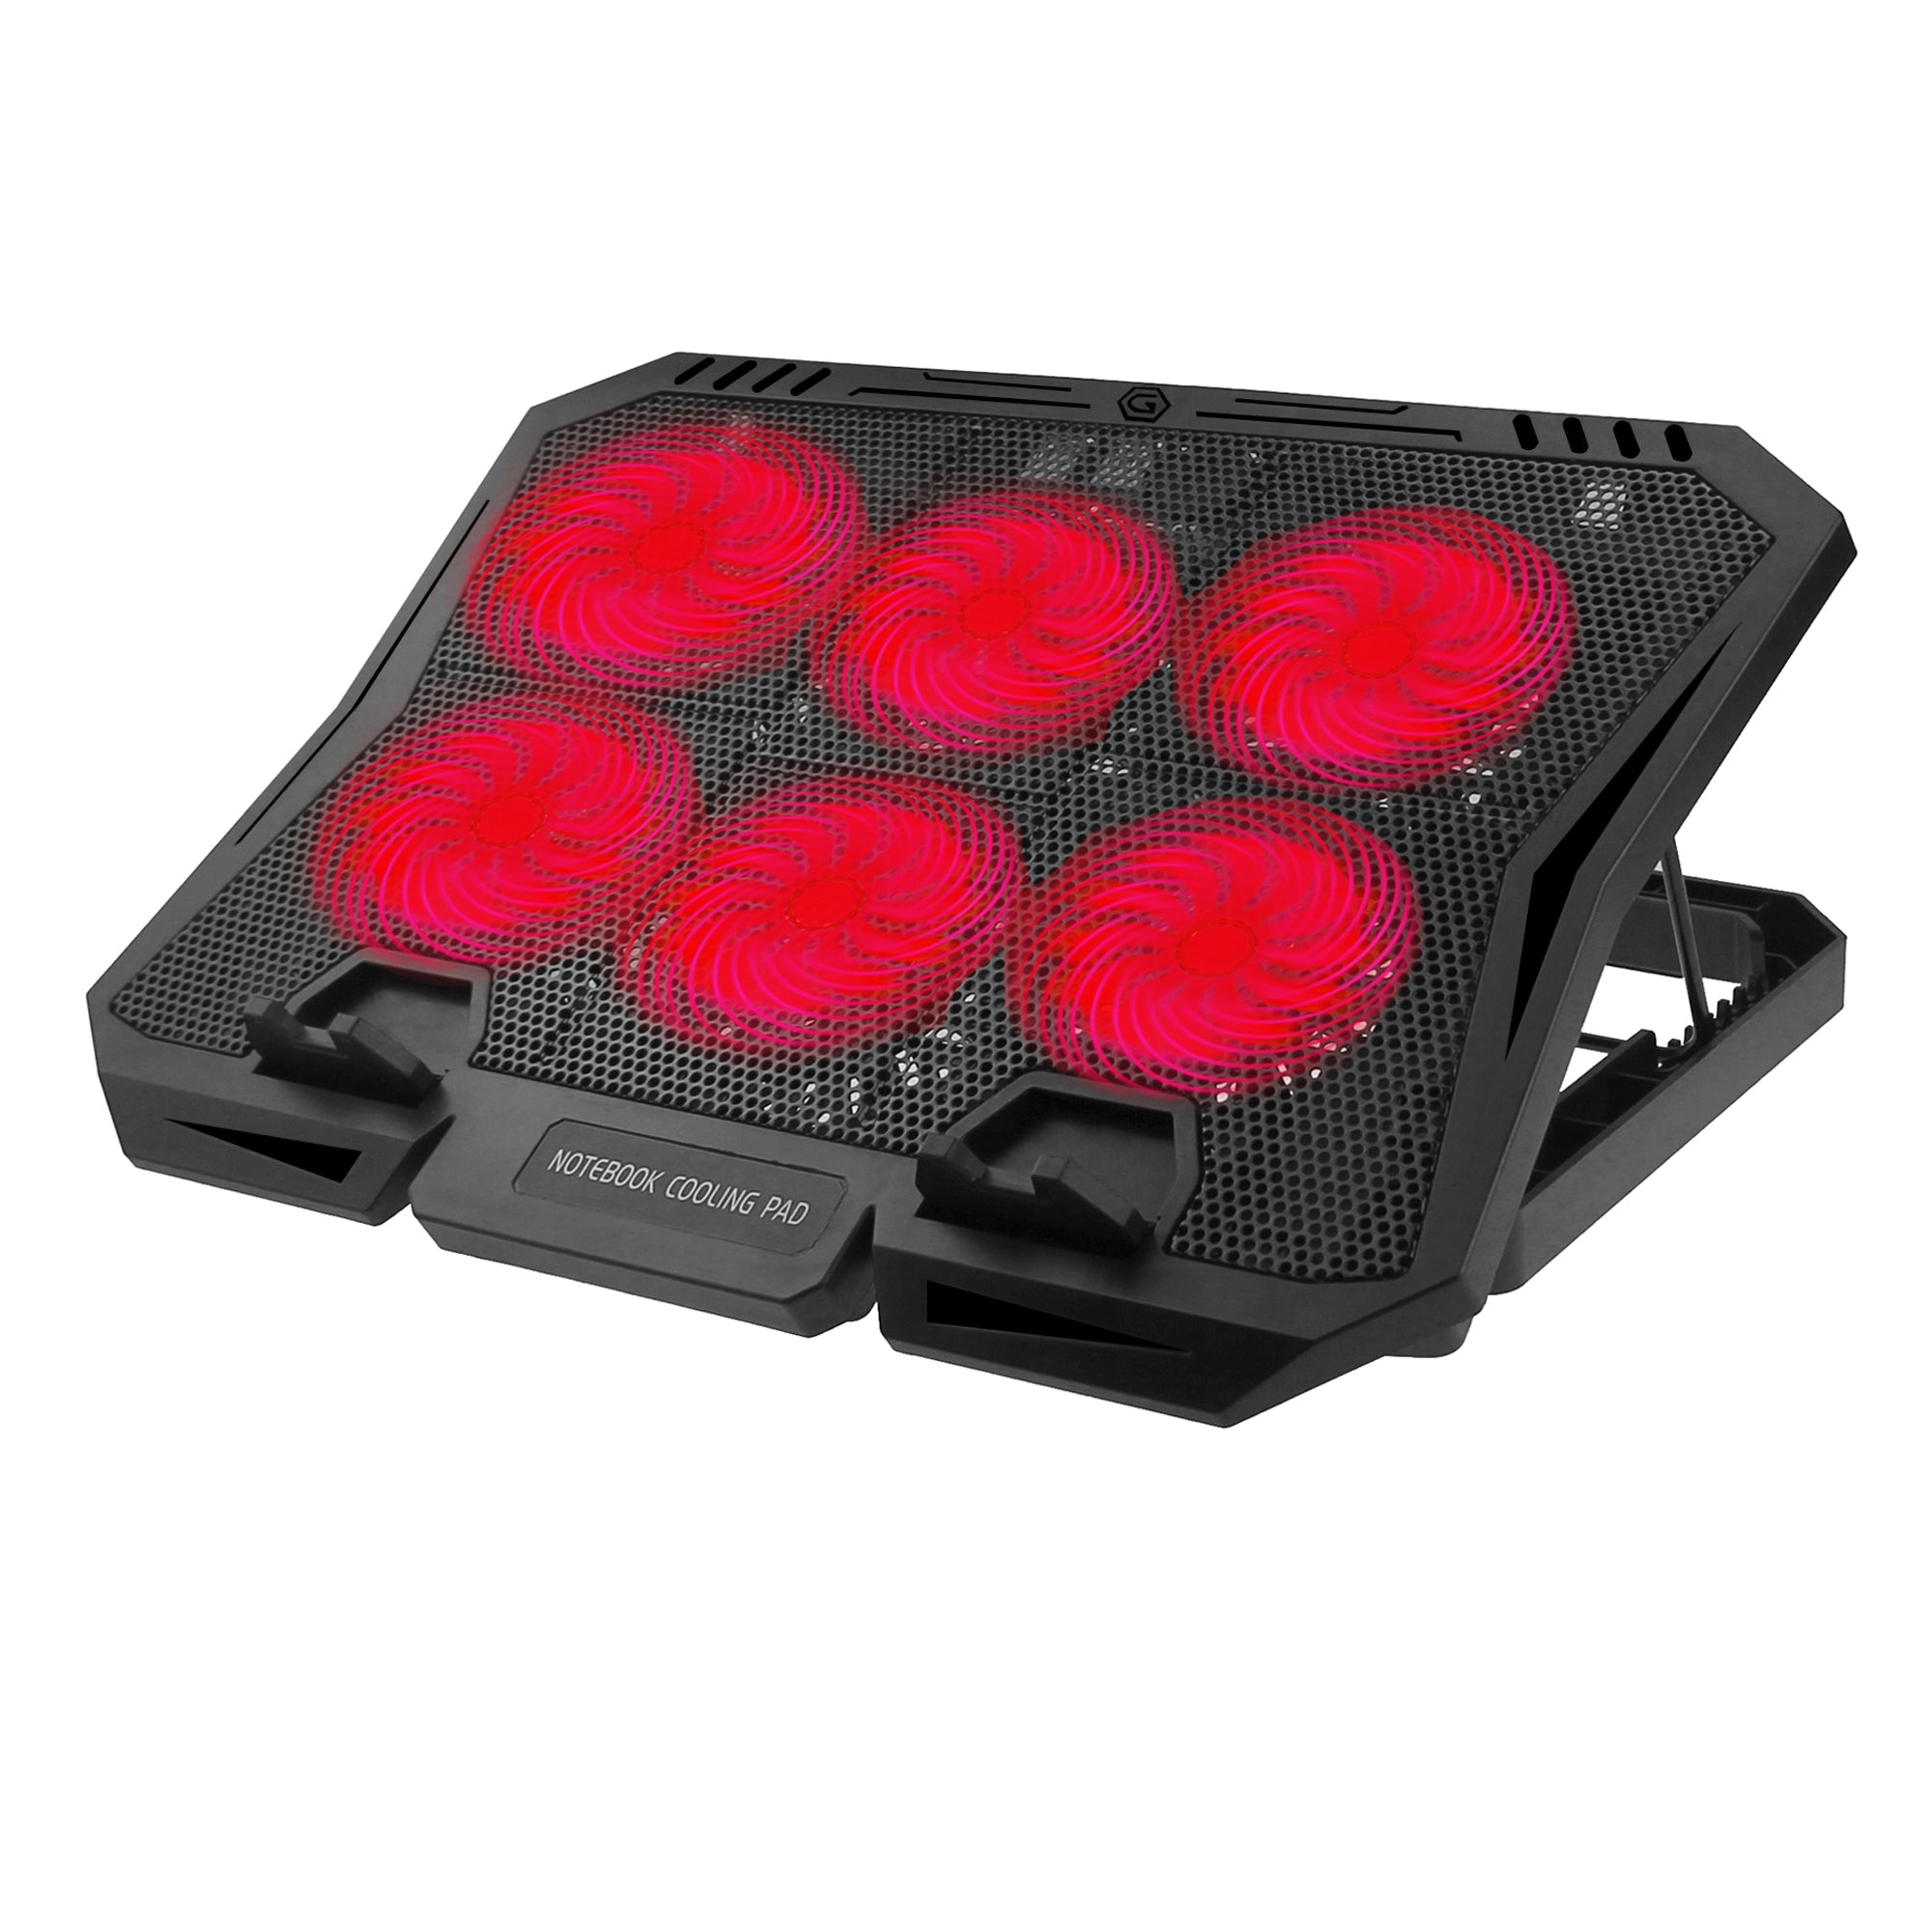 X6B 7-Gear Height 6-Fan Laptop Cooling Stand Adjustable Wind Speed Notebook Cooler - Red Light